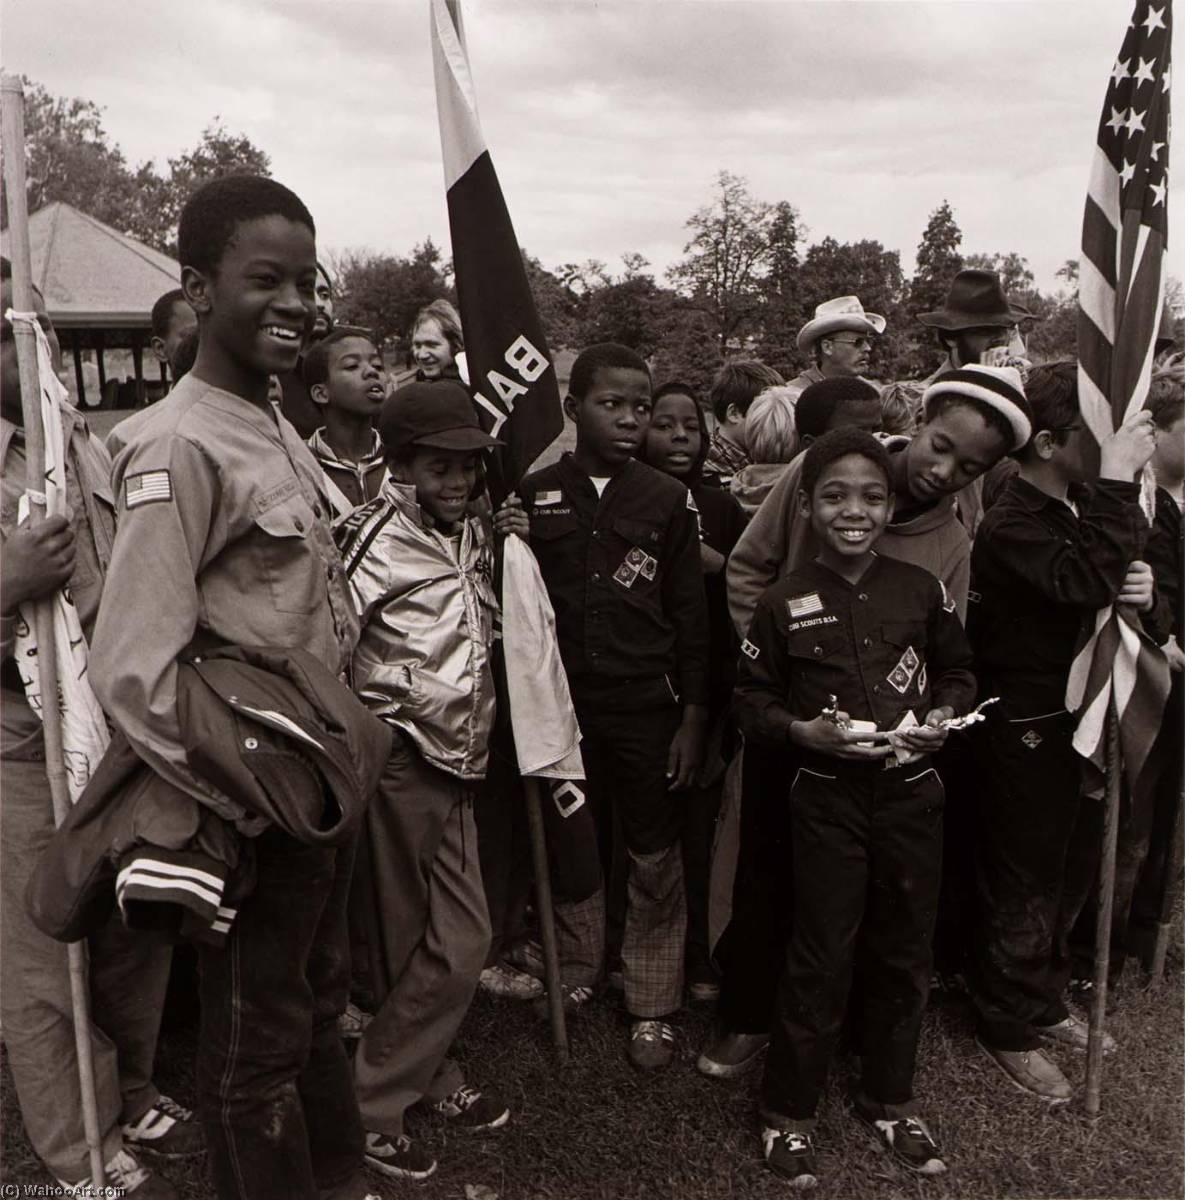 Awards Ceremony for Boy Scouts, Patterson Park, from the East Baltimore Documentary Survey Project, 1980 by Elinor Cahn (1924-2020) Elinor Cahn | ArtsDot.com